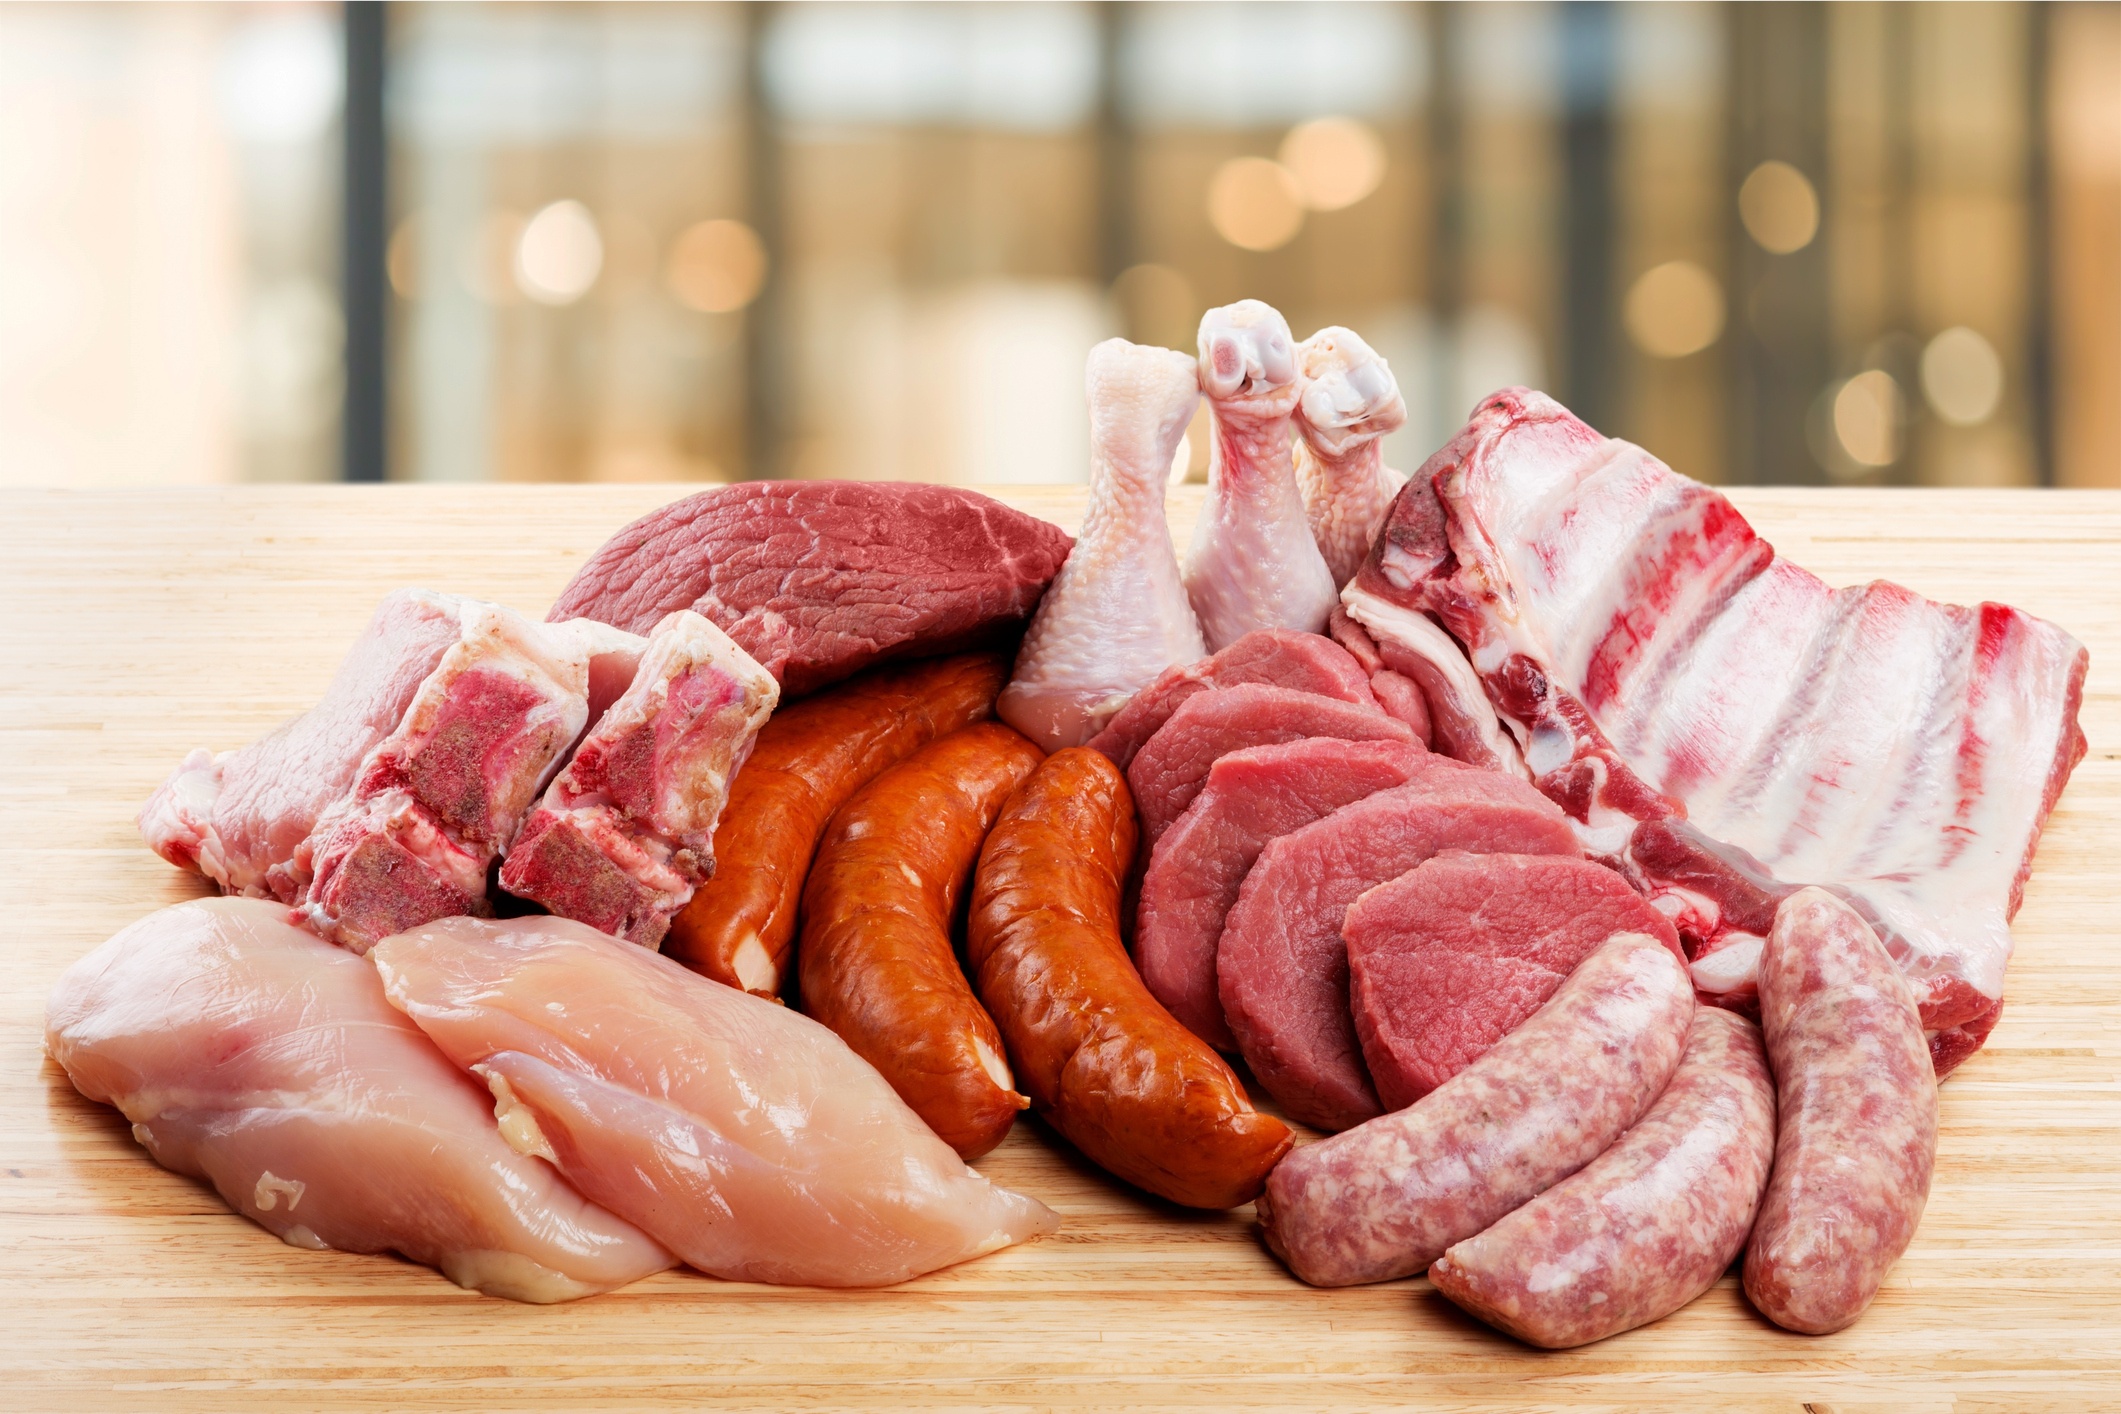 A variety of meats are gathered atop a wooden table.